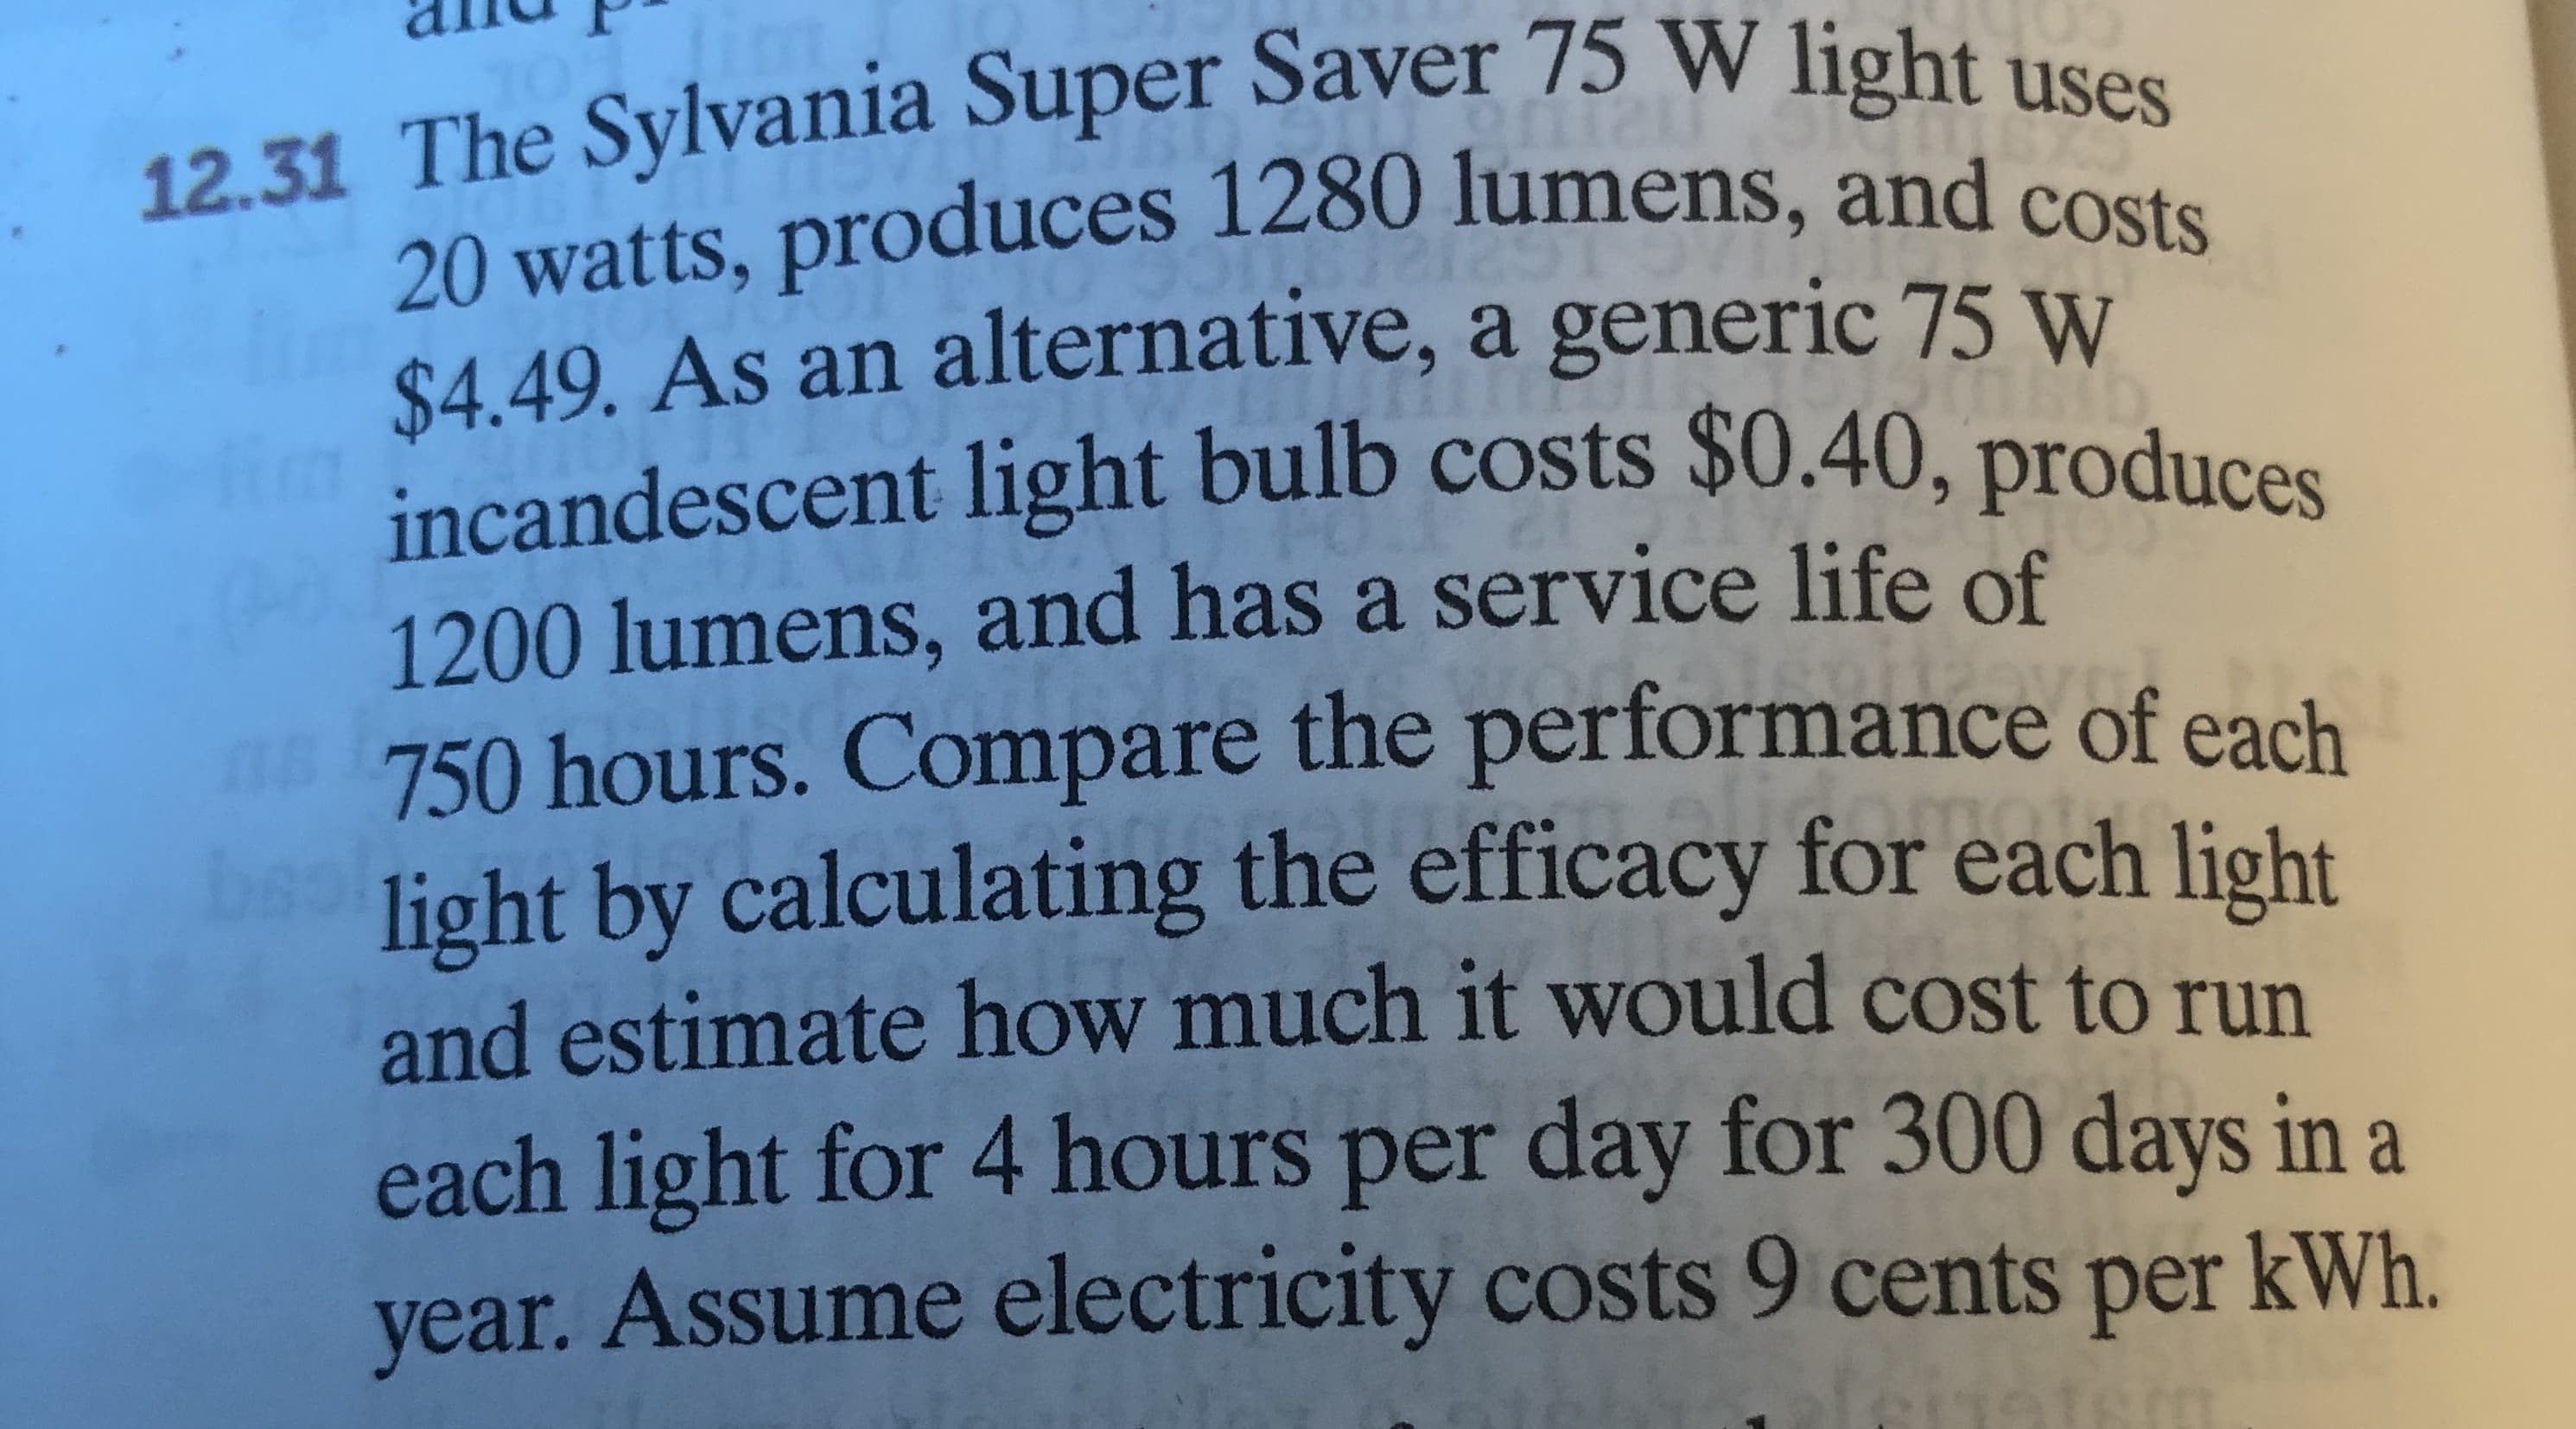 12.31 The Sylvania Super Saver 75 W light uses
20 watts, produces 1280 lumens, and costs
$4.49. As an alternative, a generic 75 W
incandescent light bulb costs $0.40, produces
1200 lumens, and has a service life of
750 hours. Compare the performance of each
light by calculating the efficacy for each light
and estimate how much it would cost to run
each light for 4 hours per day for 300 days in a
year. Assume electricity costs 9 cents per kWh.
E&
